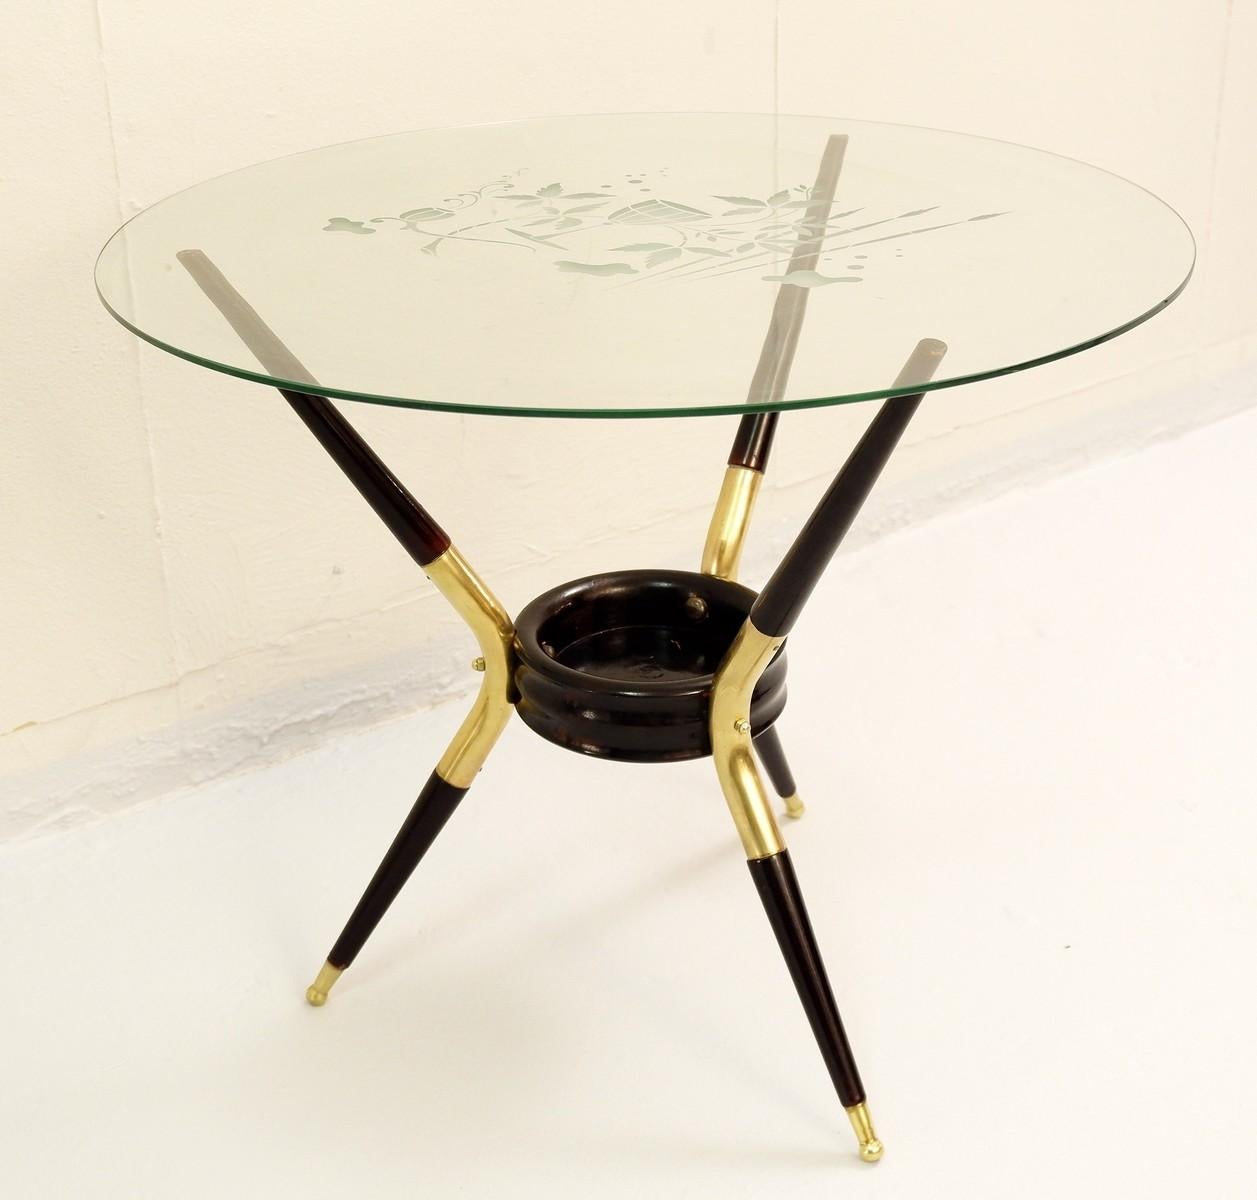 Italian tripod table with three angular legs, attributed to Cesare Lacca, 1950s.